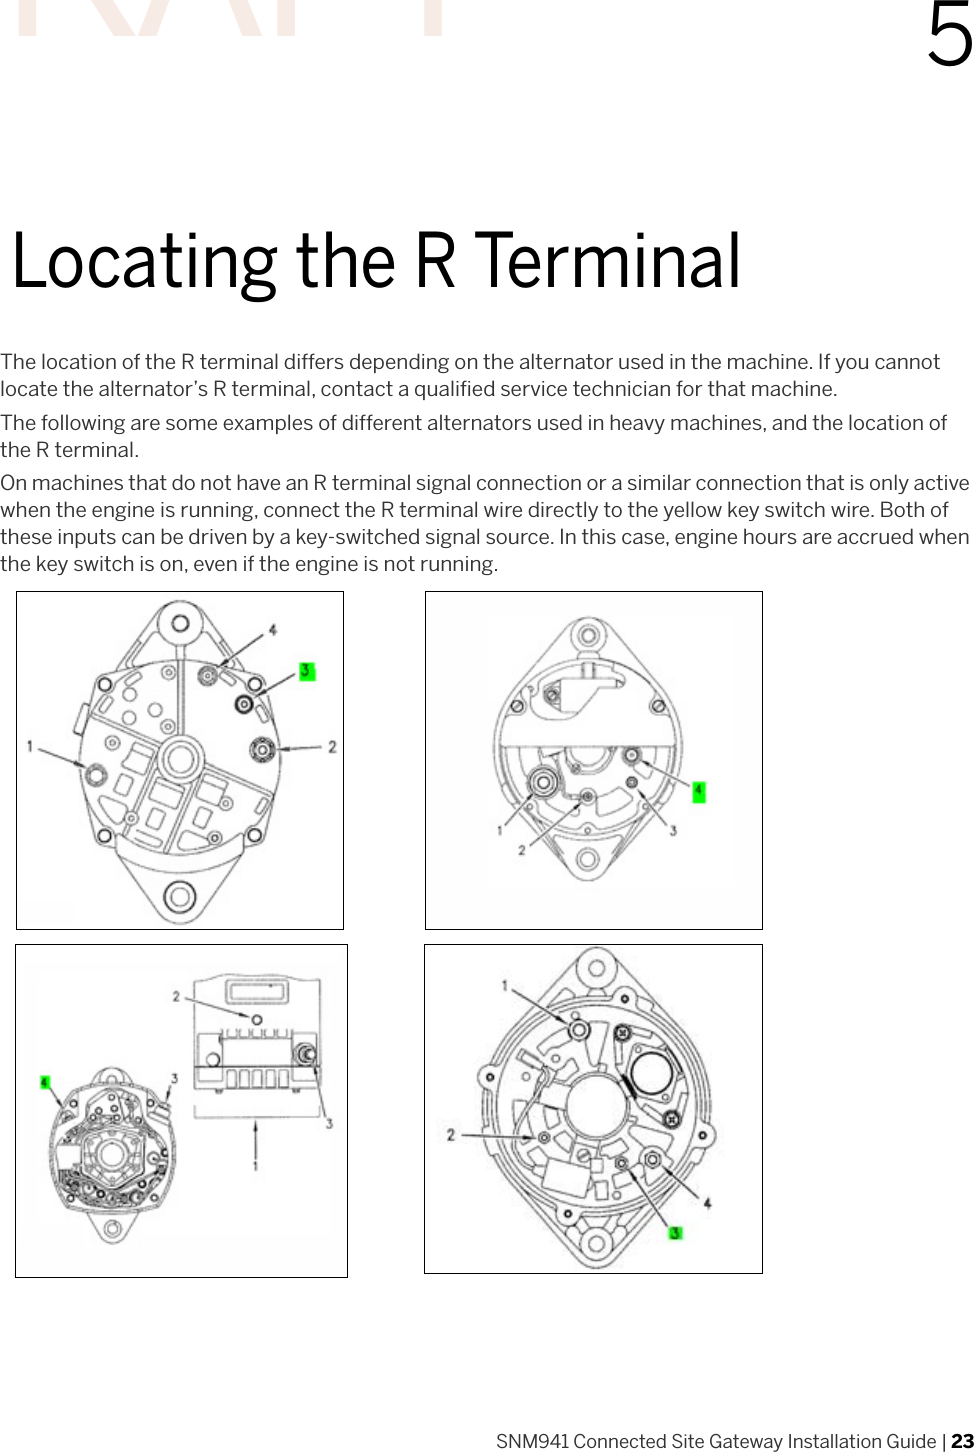 SNM941 Connected Site Gateway Installation Guide | 2355Locating the R TerminalThe location of the R terminal differs depending on the alternator used in the machine. If you cannot locate the alternator’s R terminal, contact a qualified service technician for that machine.The following are some examples of different alternators used in heavy machines, and the location of the R terminal.On machines that do not have an R terminal signal connection or a similar connection that is only active when the engine is running, connect the R terminal wire directly to the yellow key switch wire. Both of these inputs can be driven by a key-switched signal source. In this case, engine hours are accrued when the key switch is on, even if the engine is not running.DRAFT